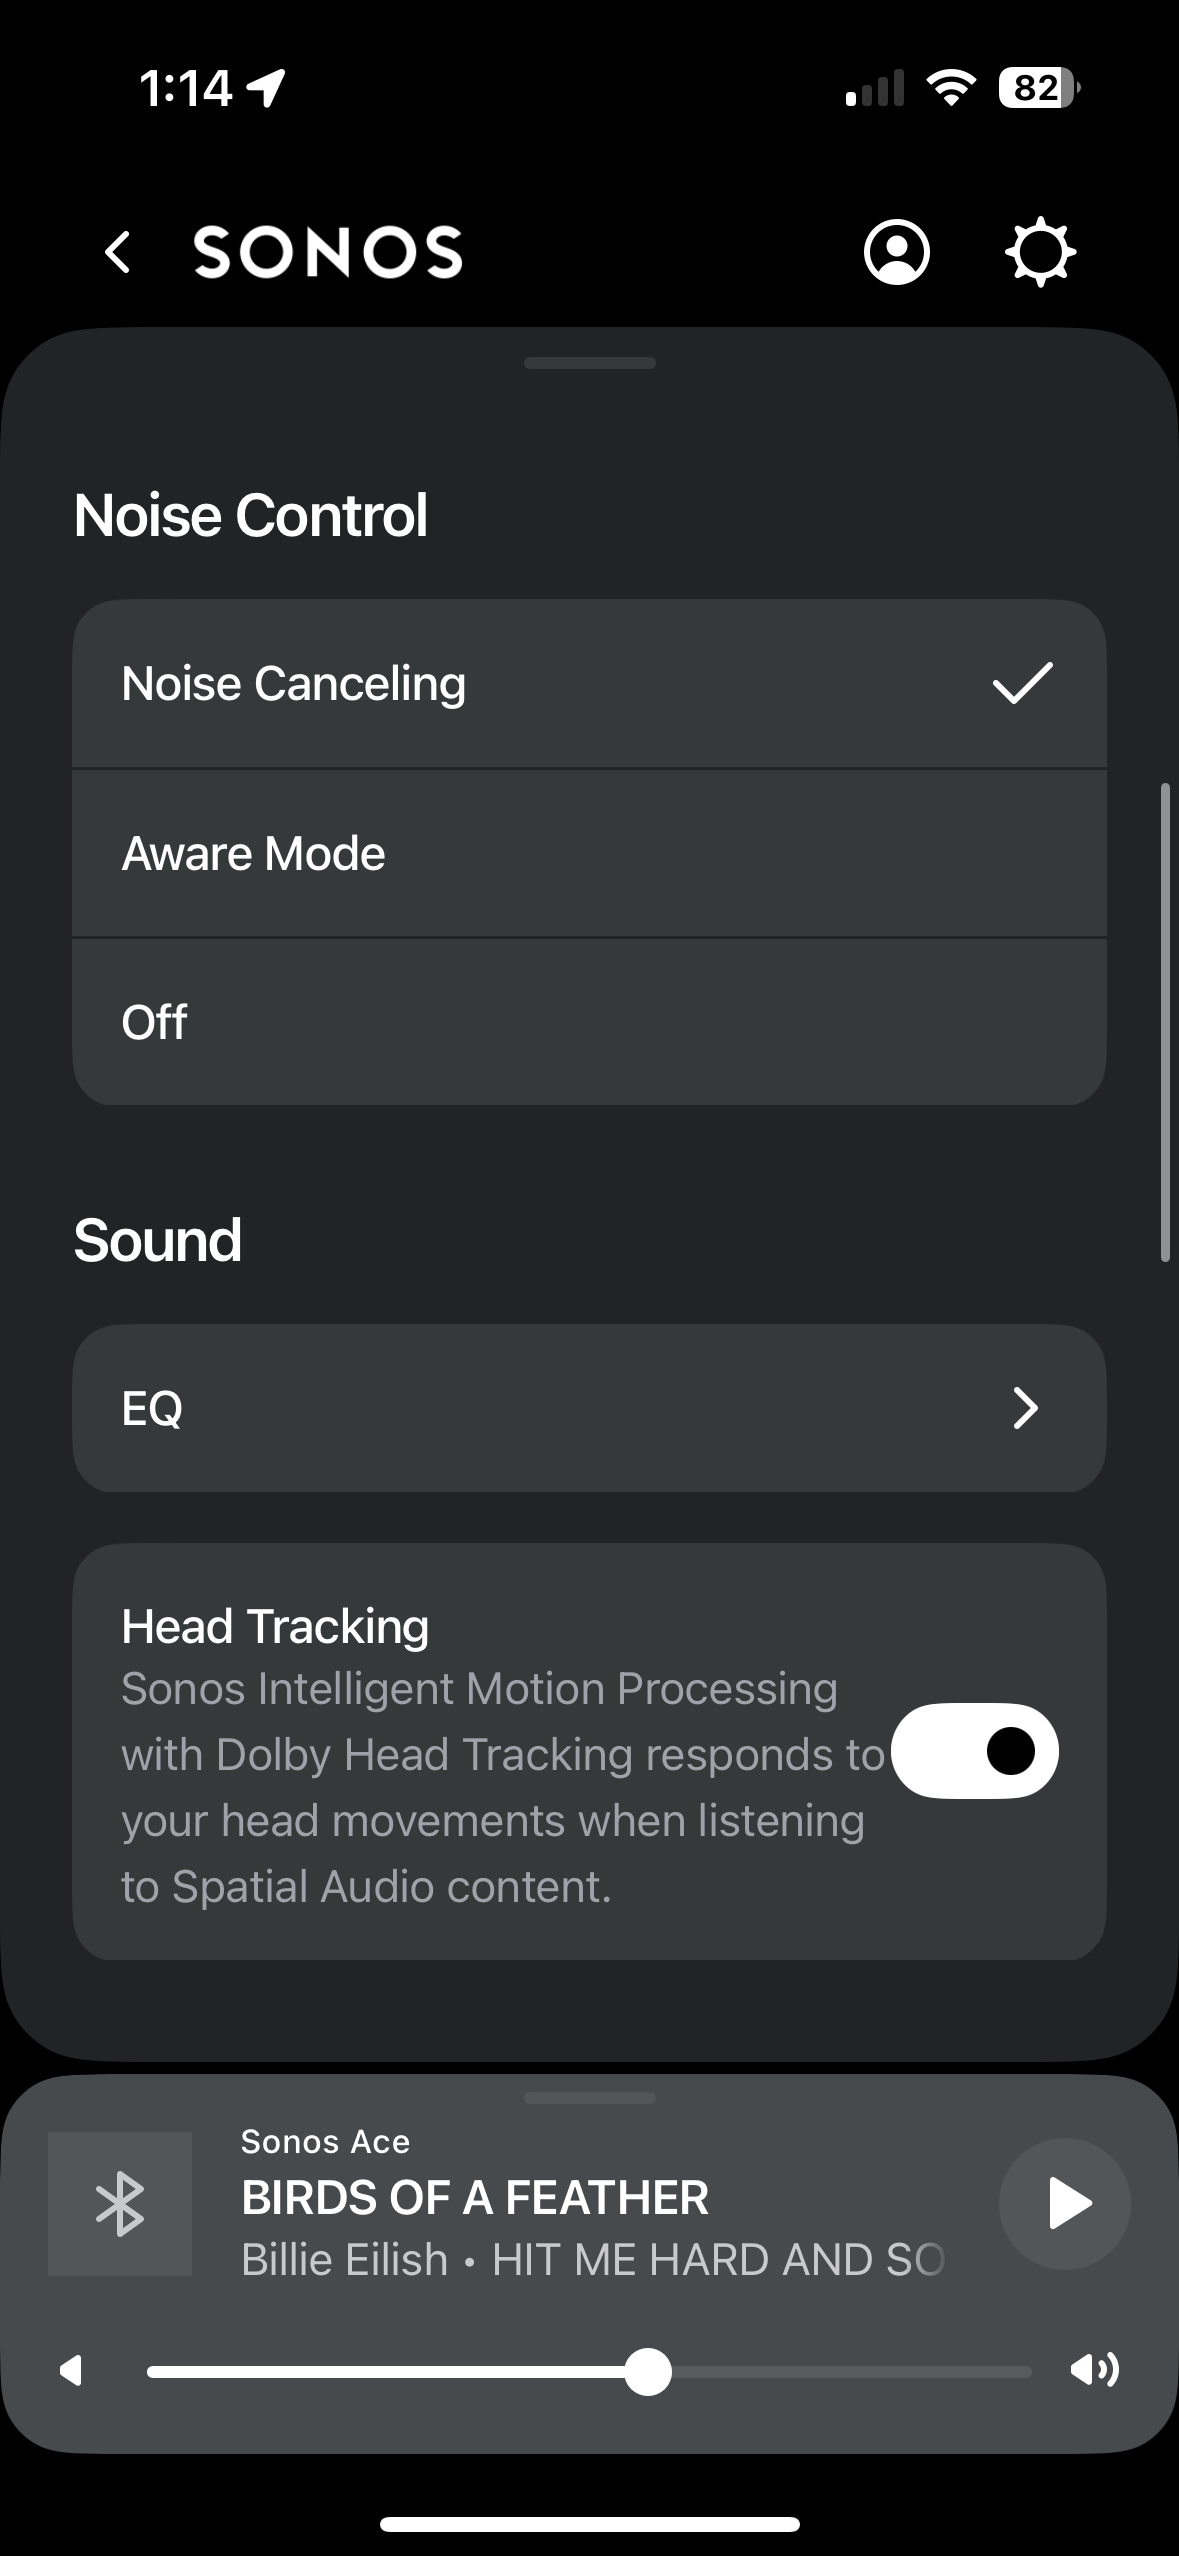 Sonos app interface showing the noise control and sound settings for the Sonos Ace headphones